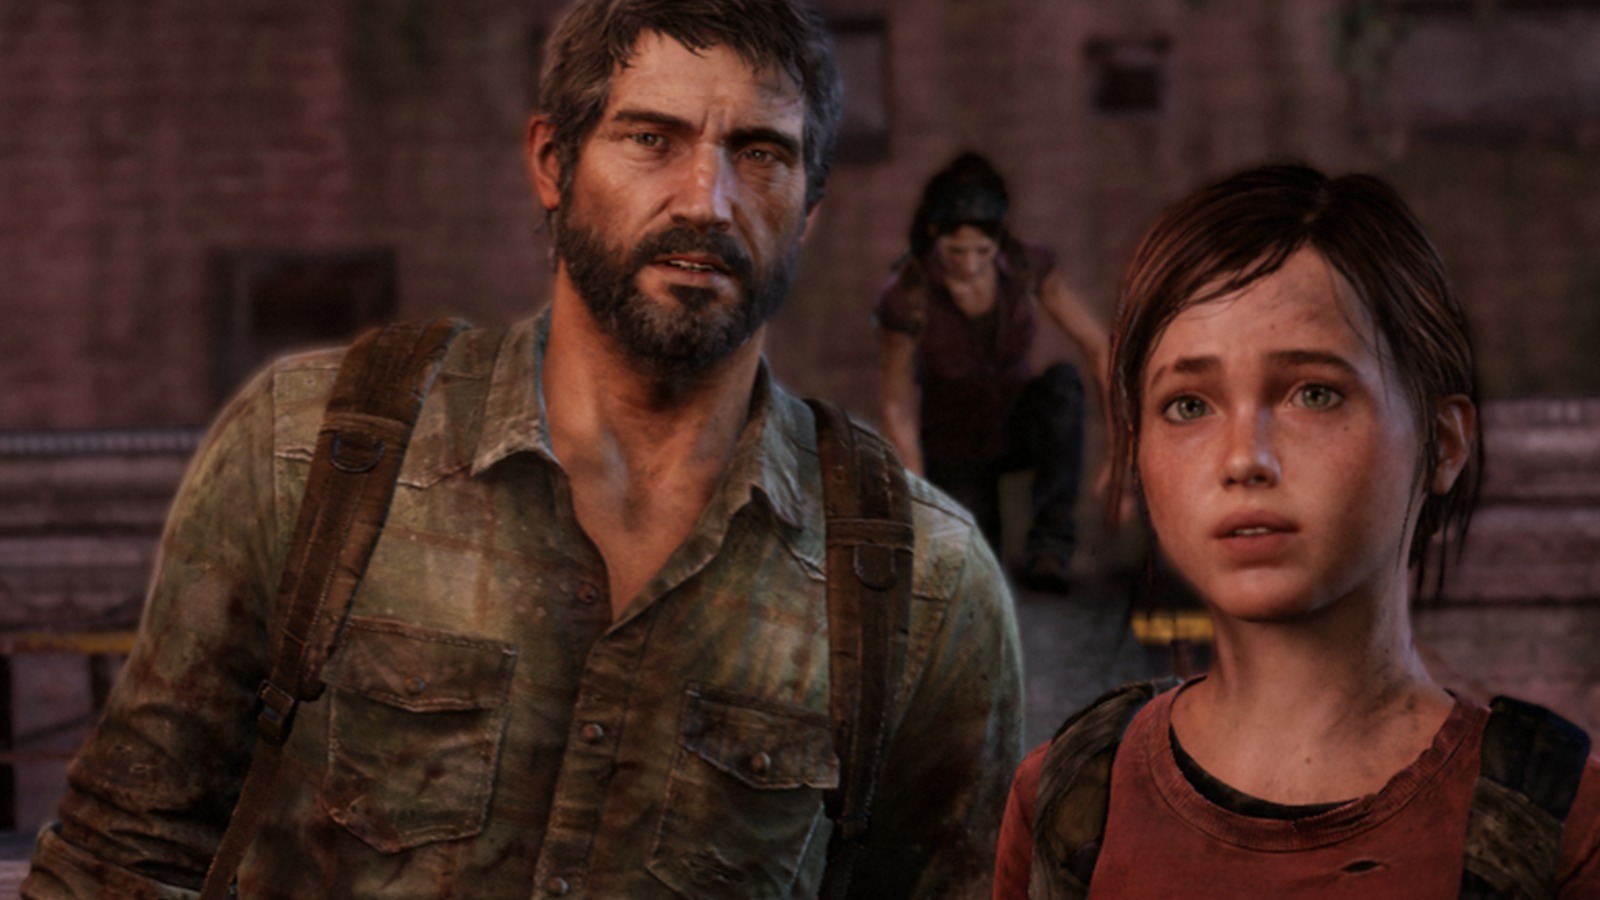 HBO's The Last of Us has major roles for Troy Baker, Ashley Johnson